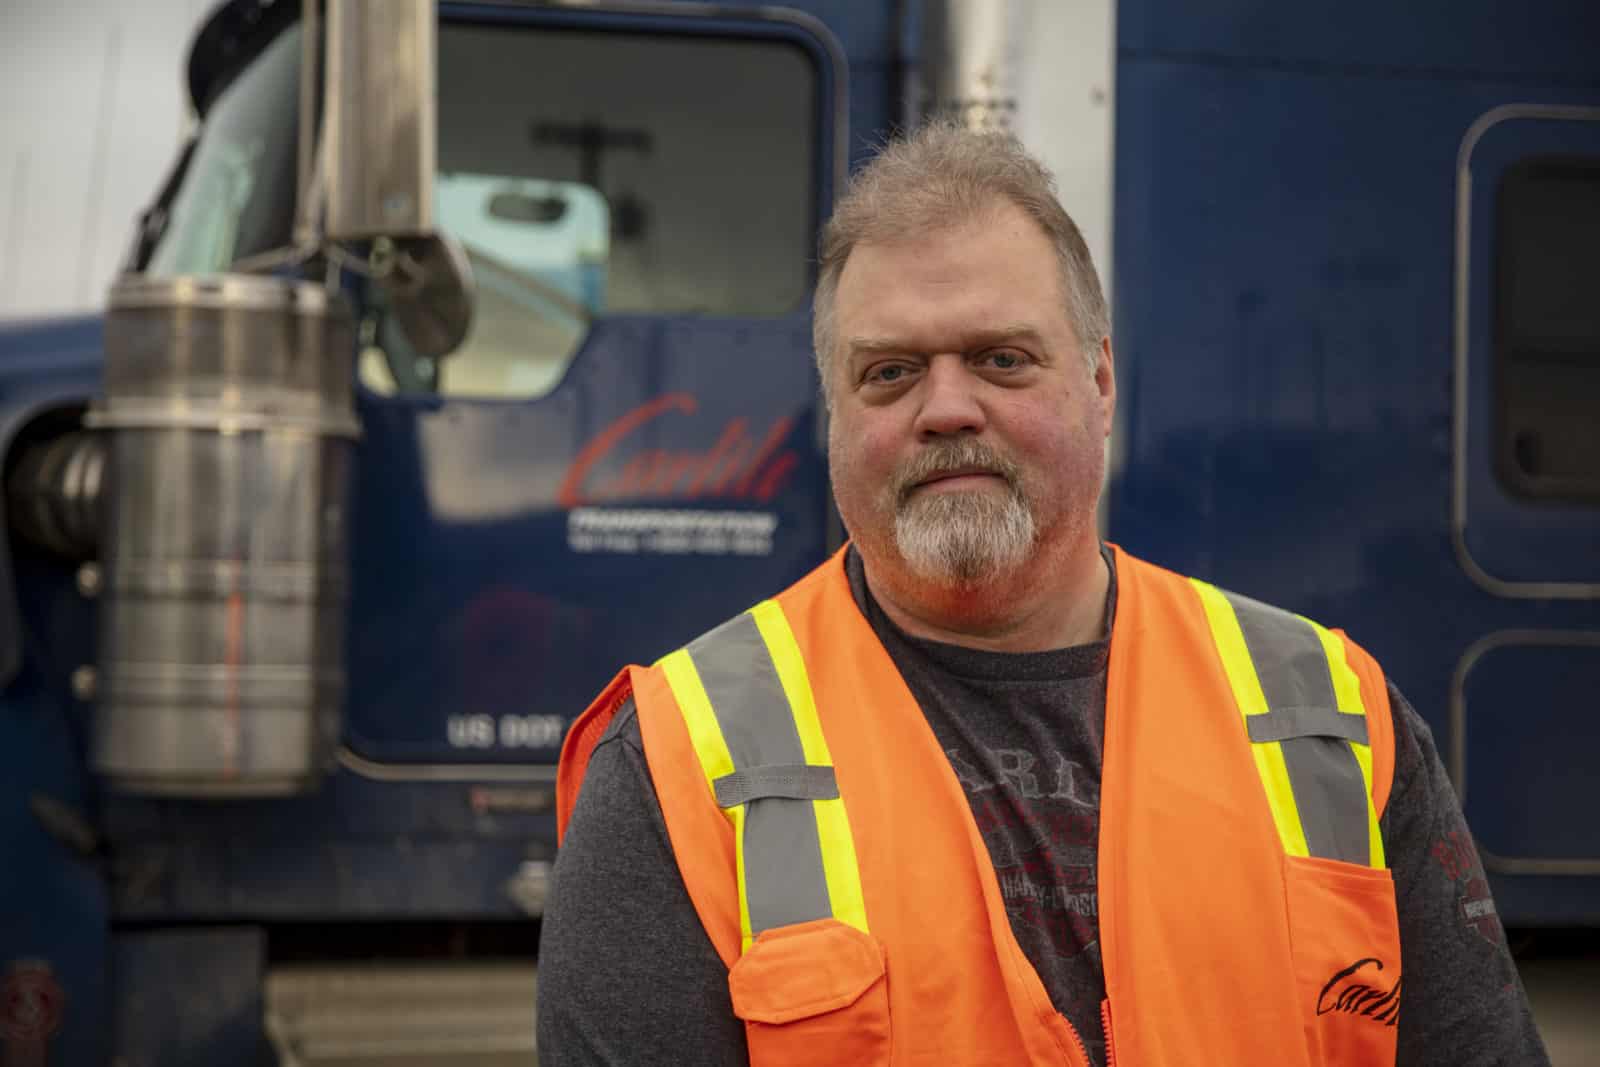 Tony poses in an orange reflective vest in front of a Carlile truck.